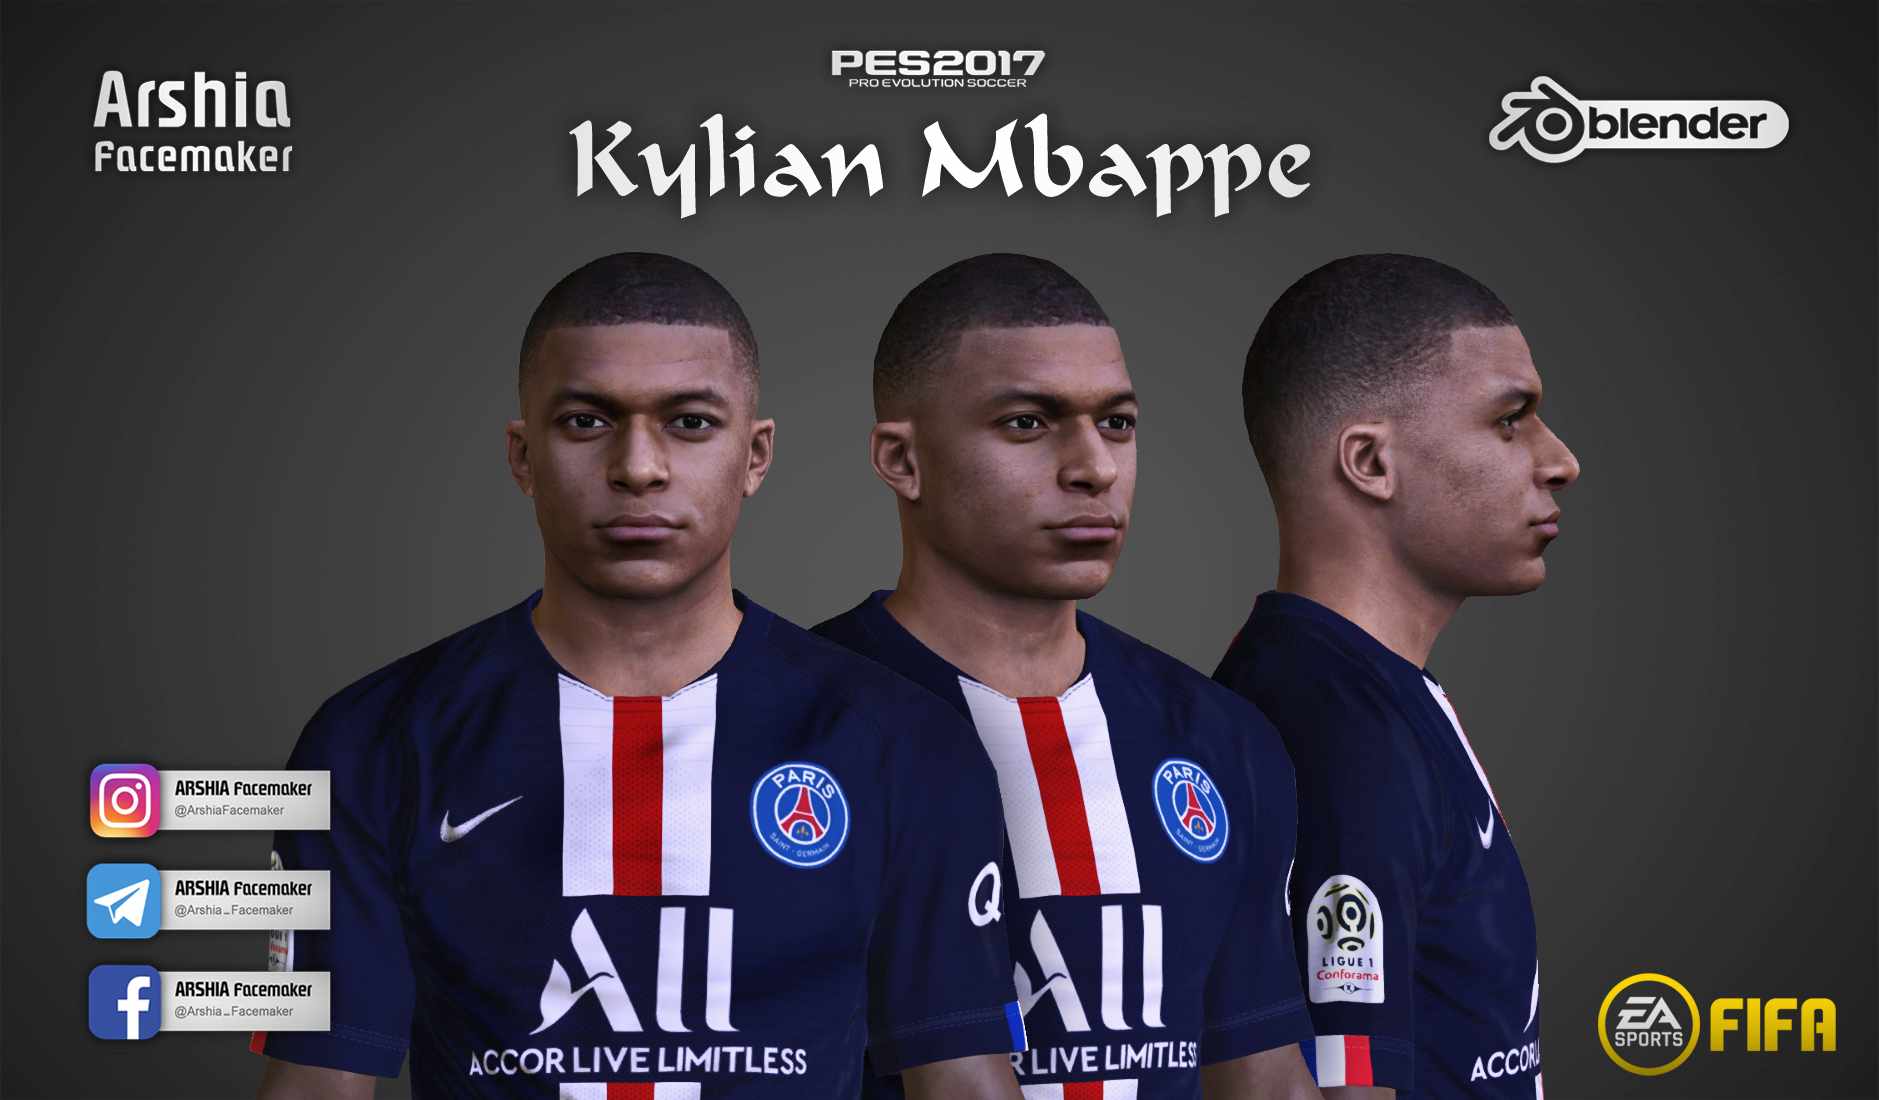 PES 2017 Kylian Mbappe Face v2 by Arshia Facemaker